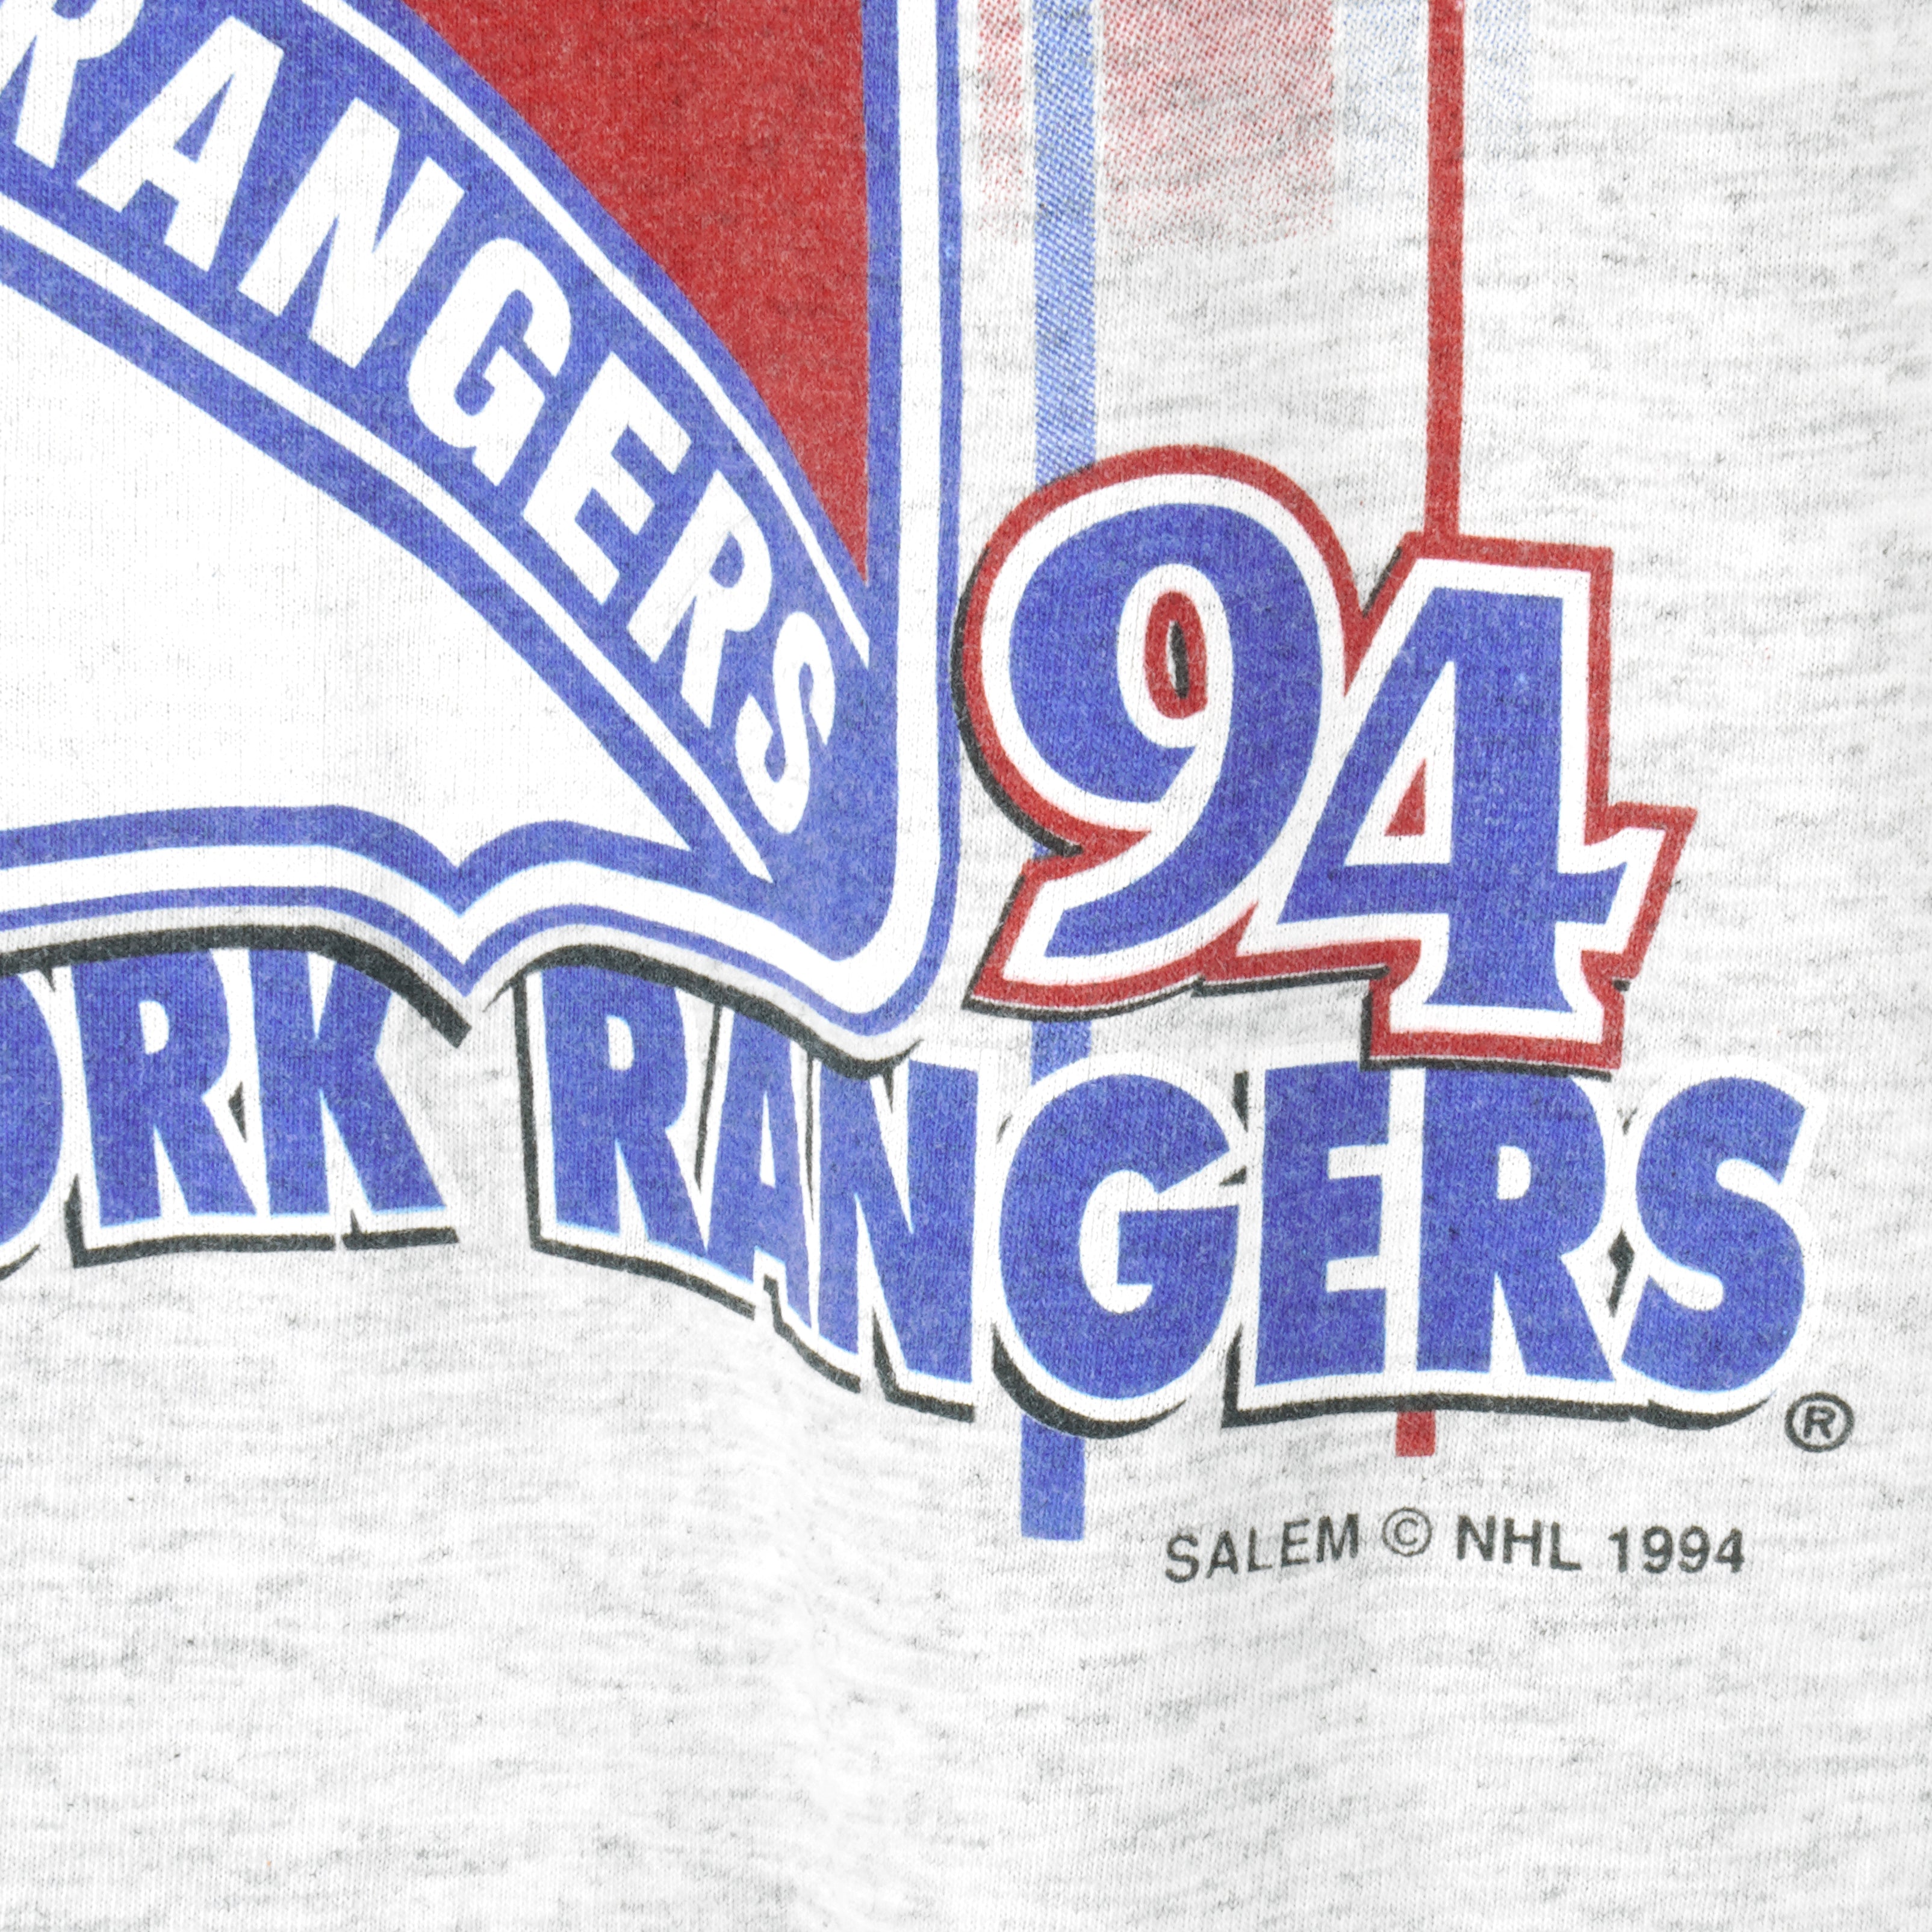 Vintage 1992 NHL New York Rangers Spellout Baby Blue T-Shirt